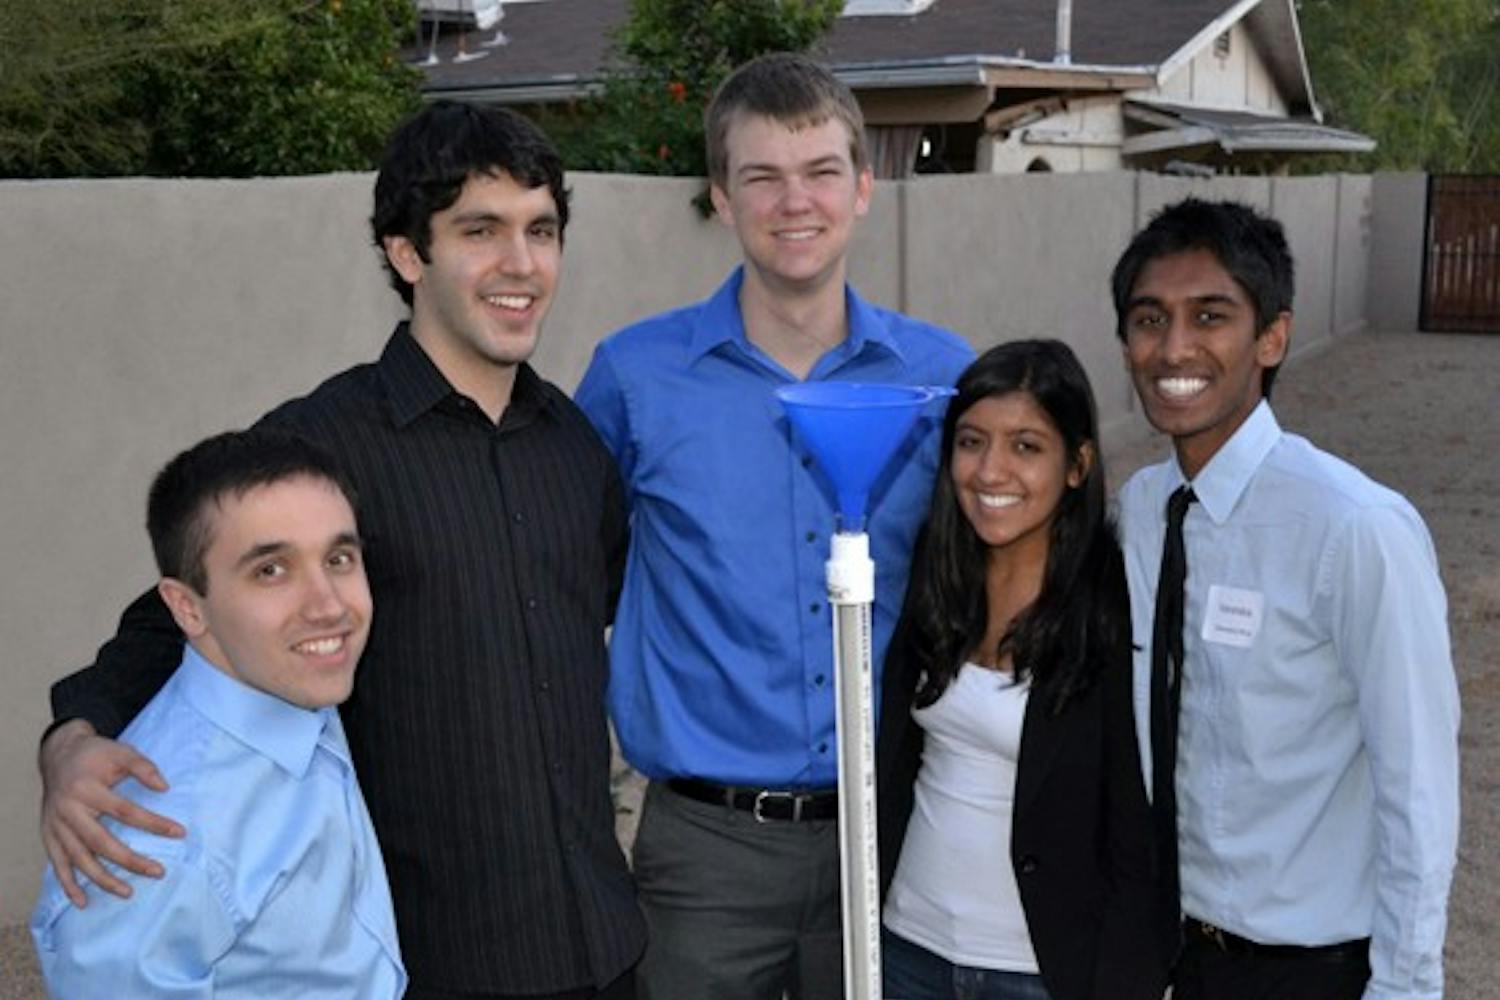 Biomedical engineering students (from left to right) Paul Strong, Mark Huerta, Connor Wiegand, Pankti Shah, and Varendra Silva form “33 Buckets,” an Engineering Projects in Community Service team that built a prototype water filter. The students are working to raise money to go to Bangladesh to install the filter in a school this summer. (Photo by Brittany Lea)